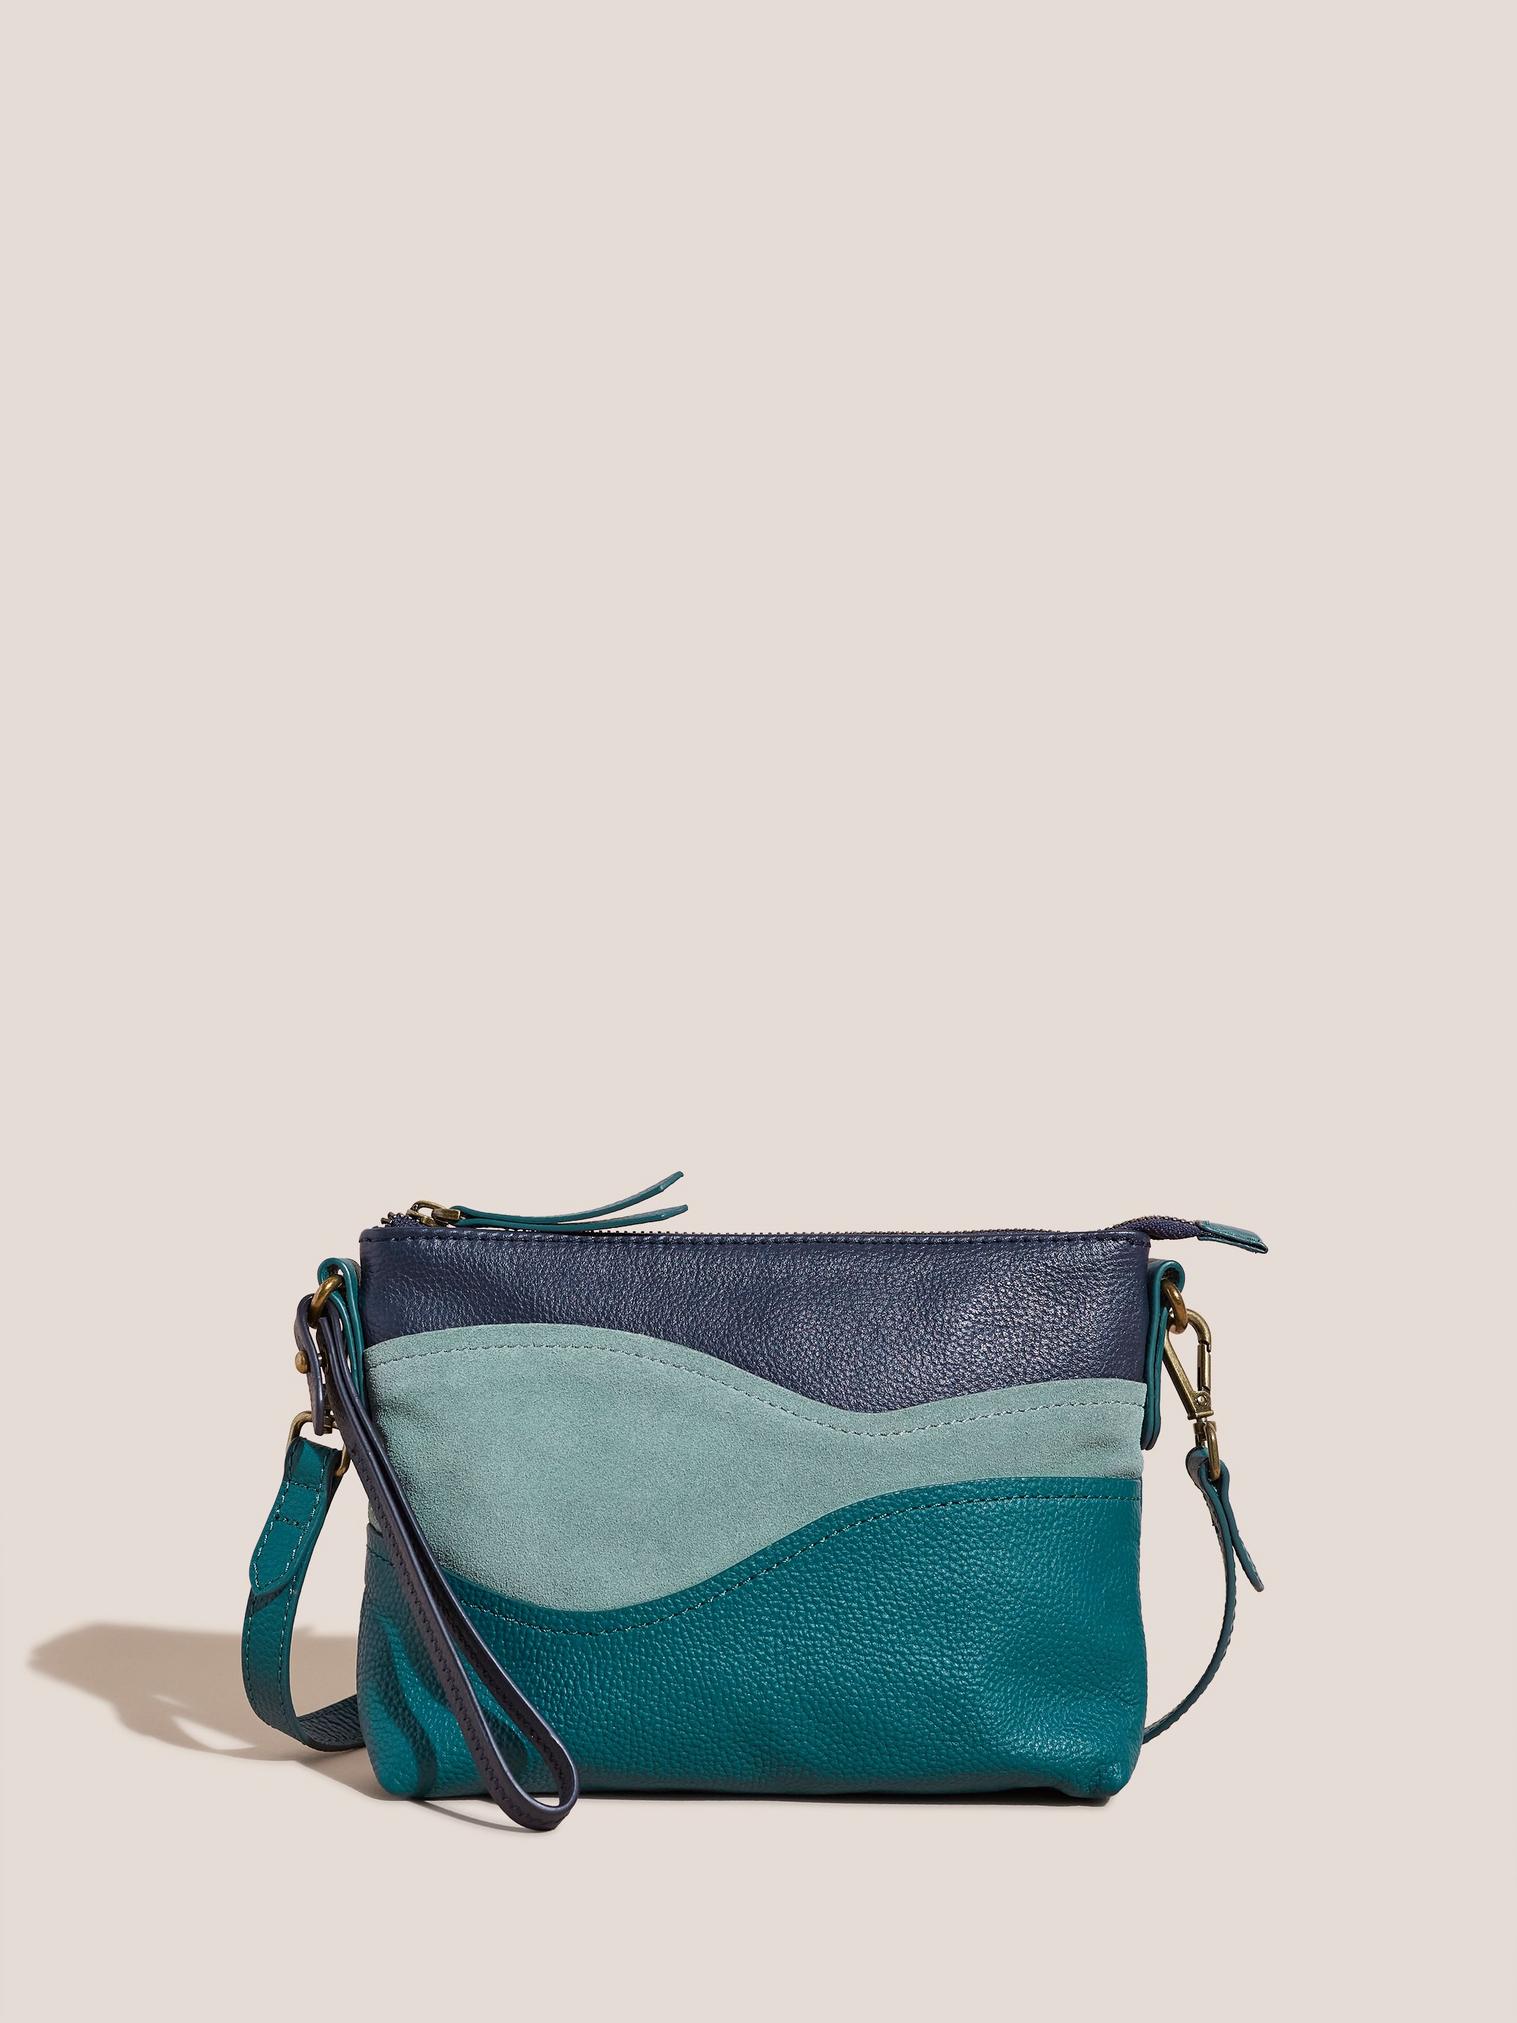 Poppy Pouch Bag in TEAL MLT - FLAT FRONT